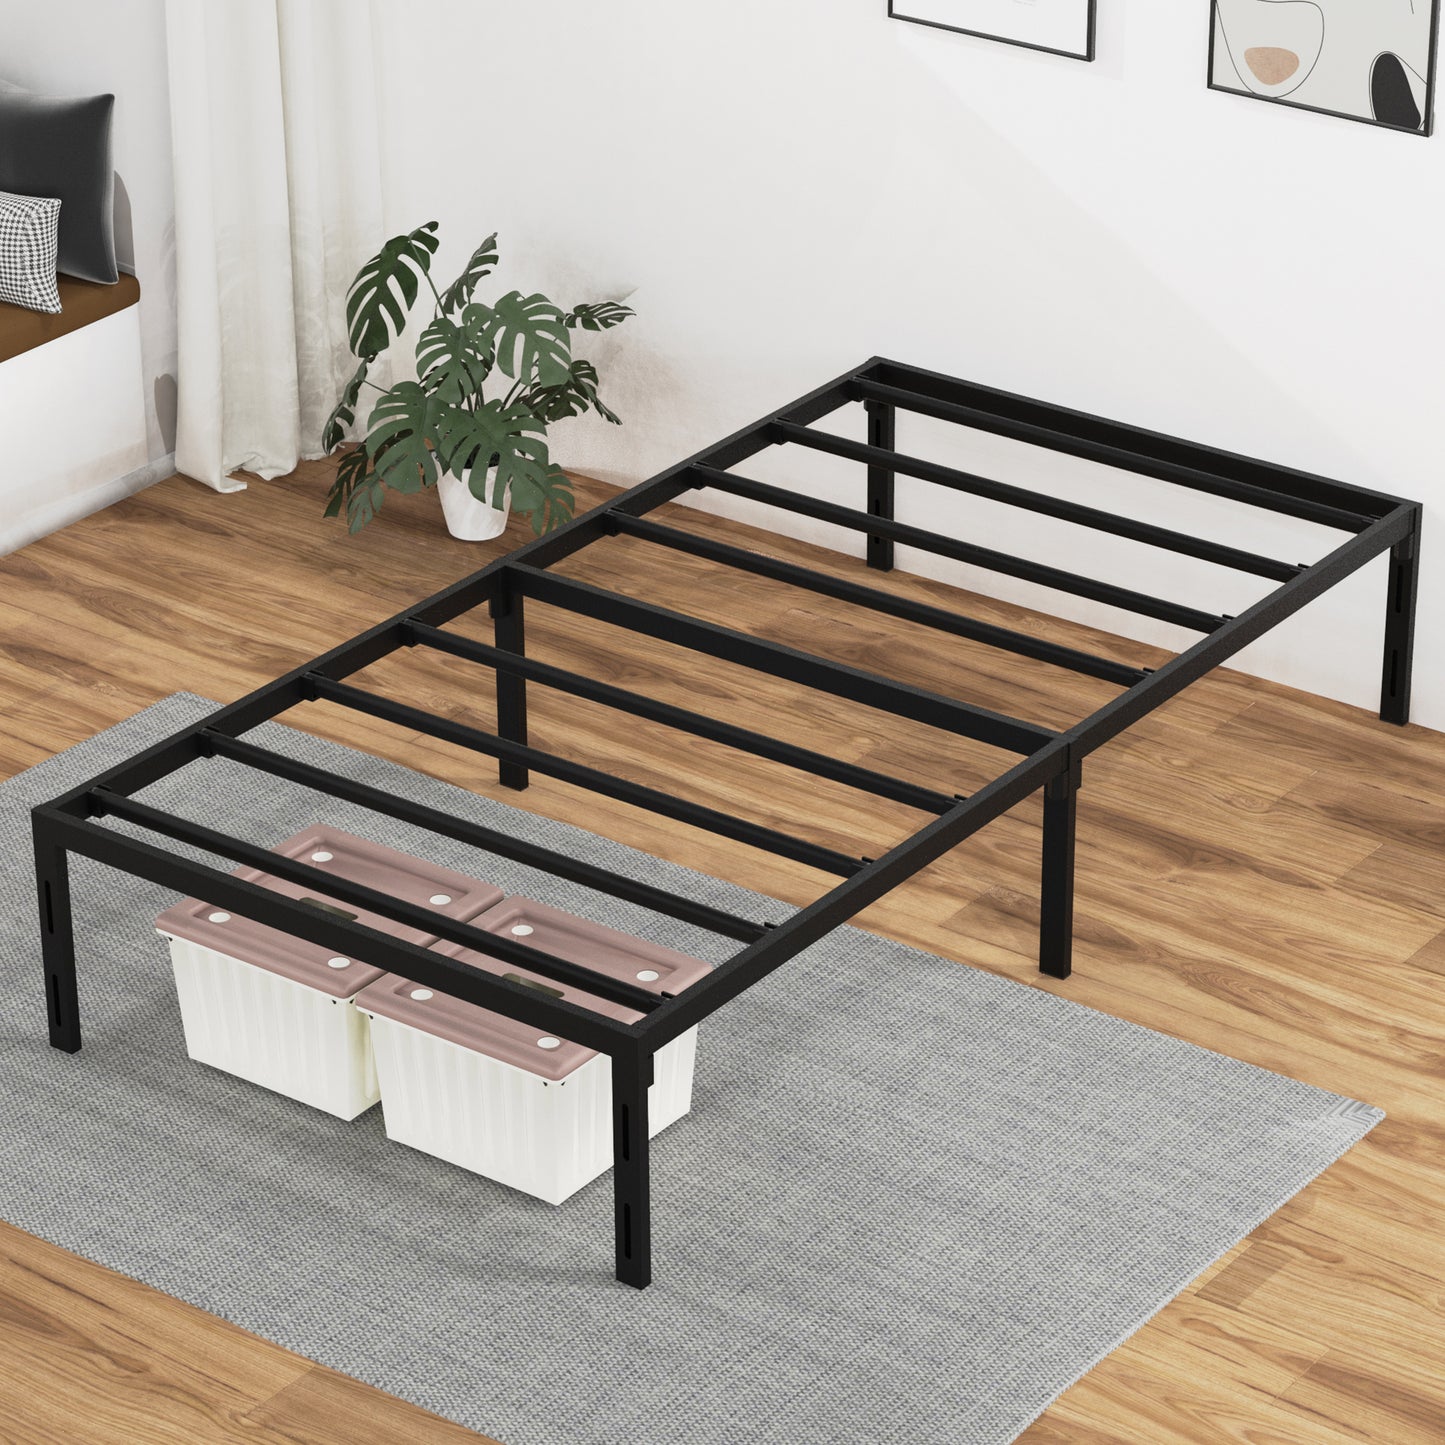 Nefoso Bed Frame, 14 inch Tall Heavy Duty Metal Platform Bed Frame, No Box Spring Needed